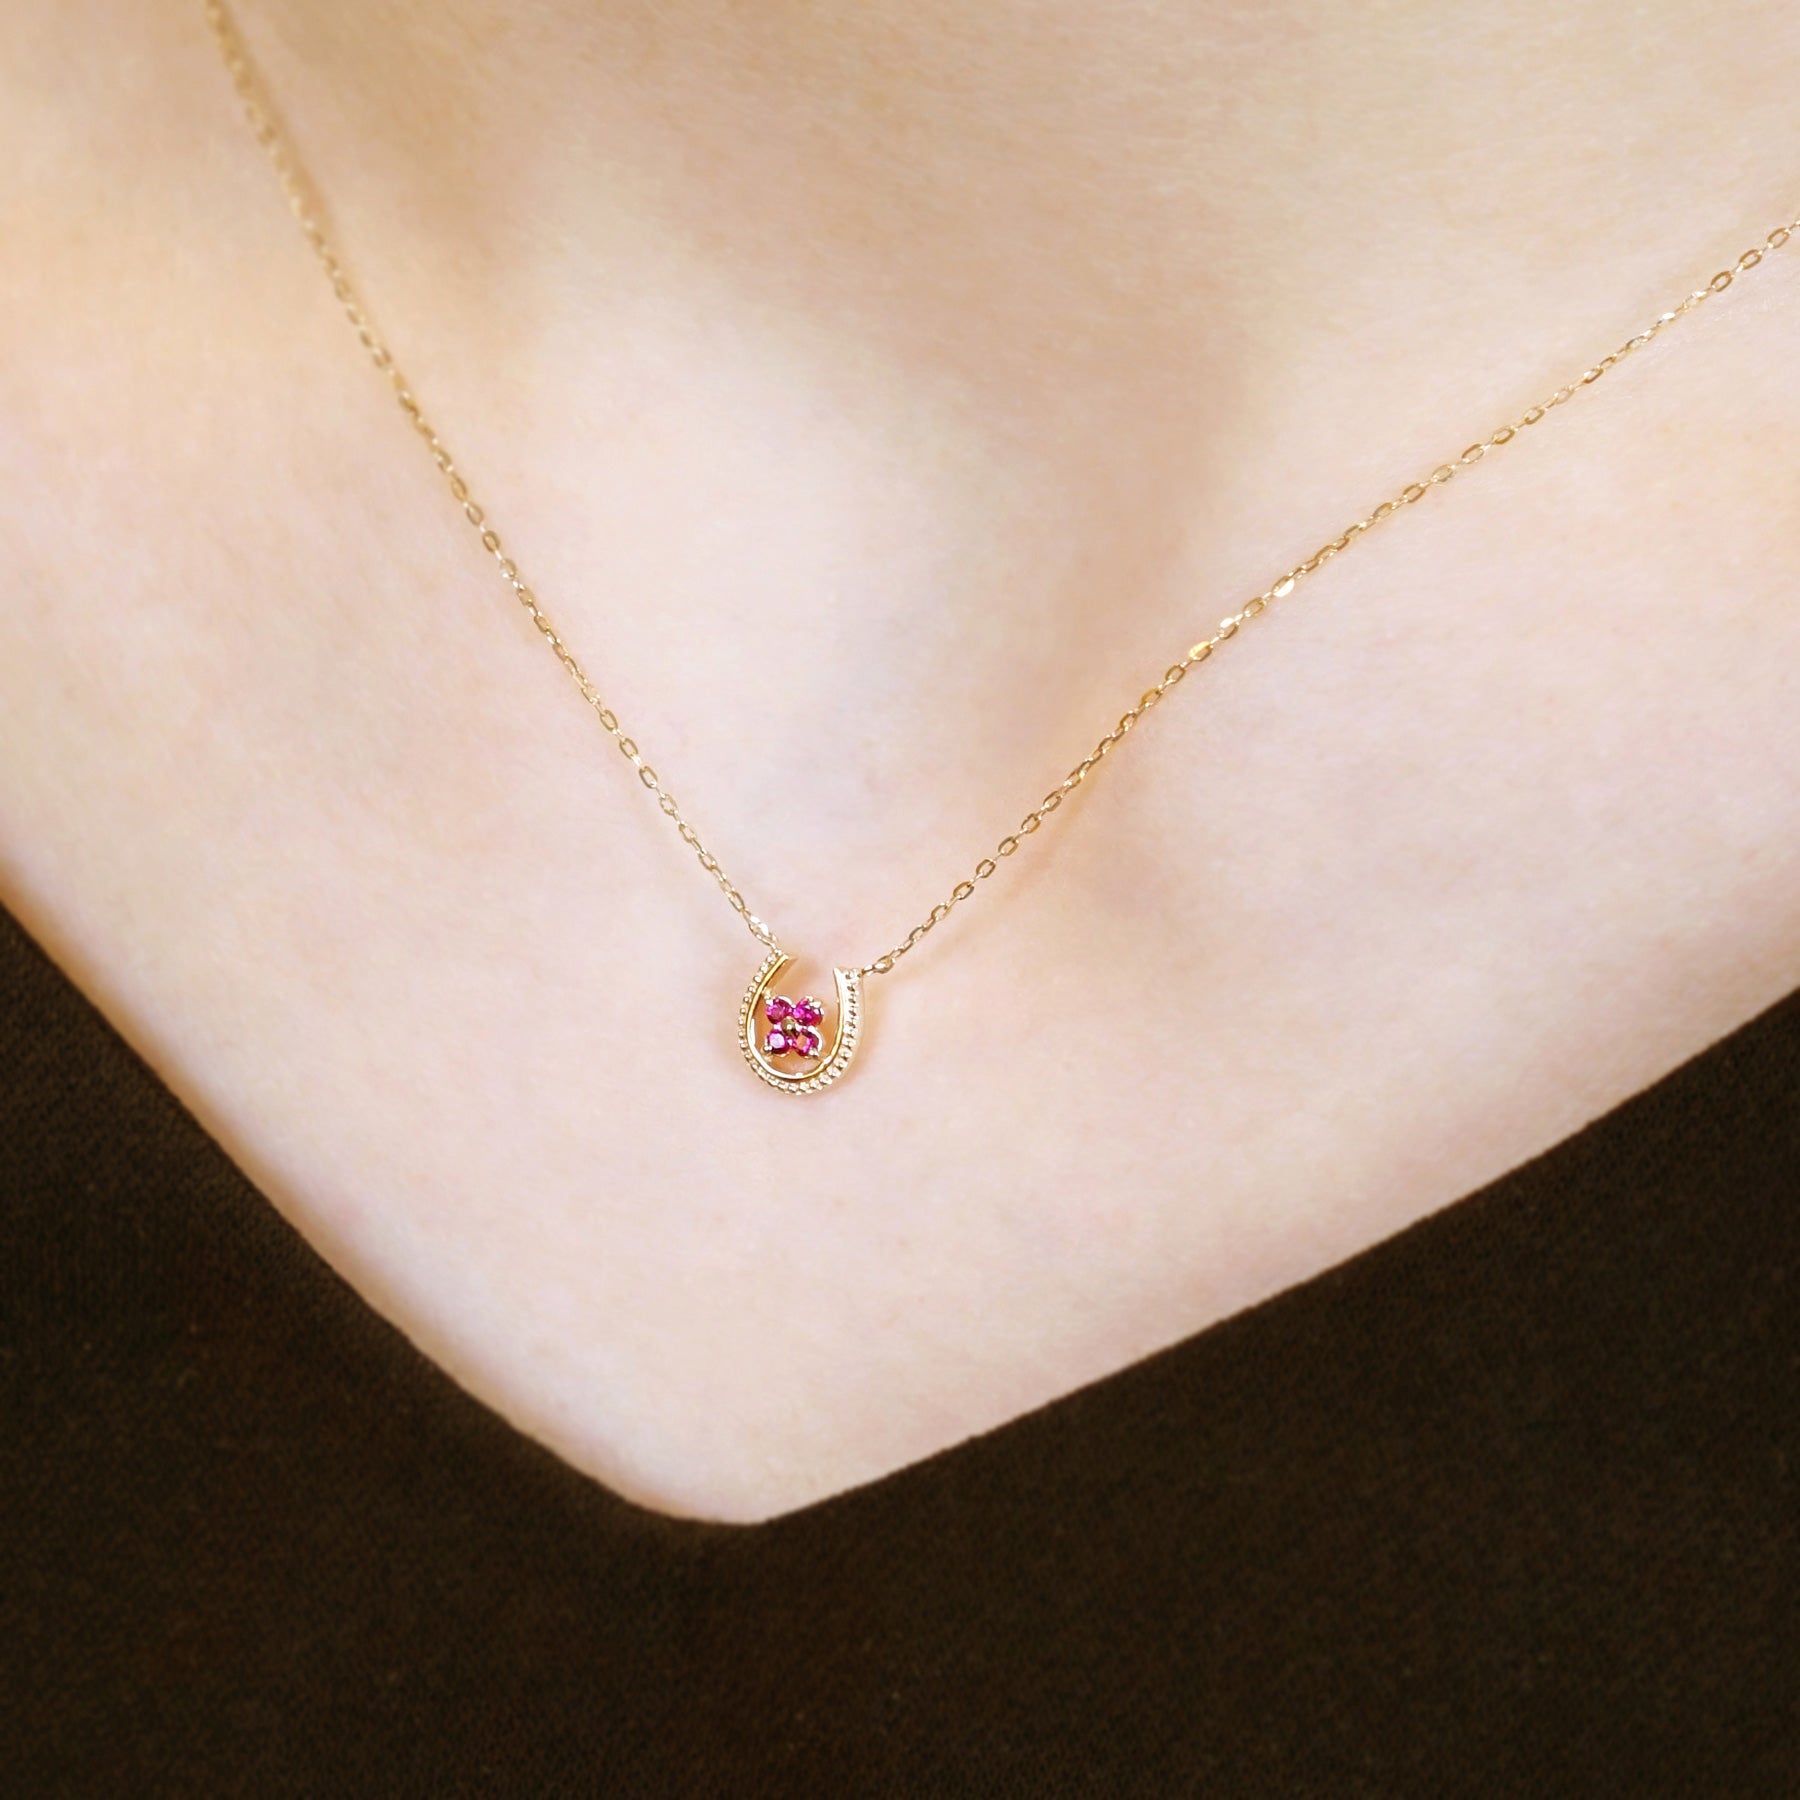 10K Yellow Gold Ruby Double Happiness Necklace - Model Image